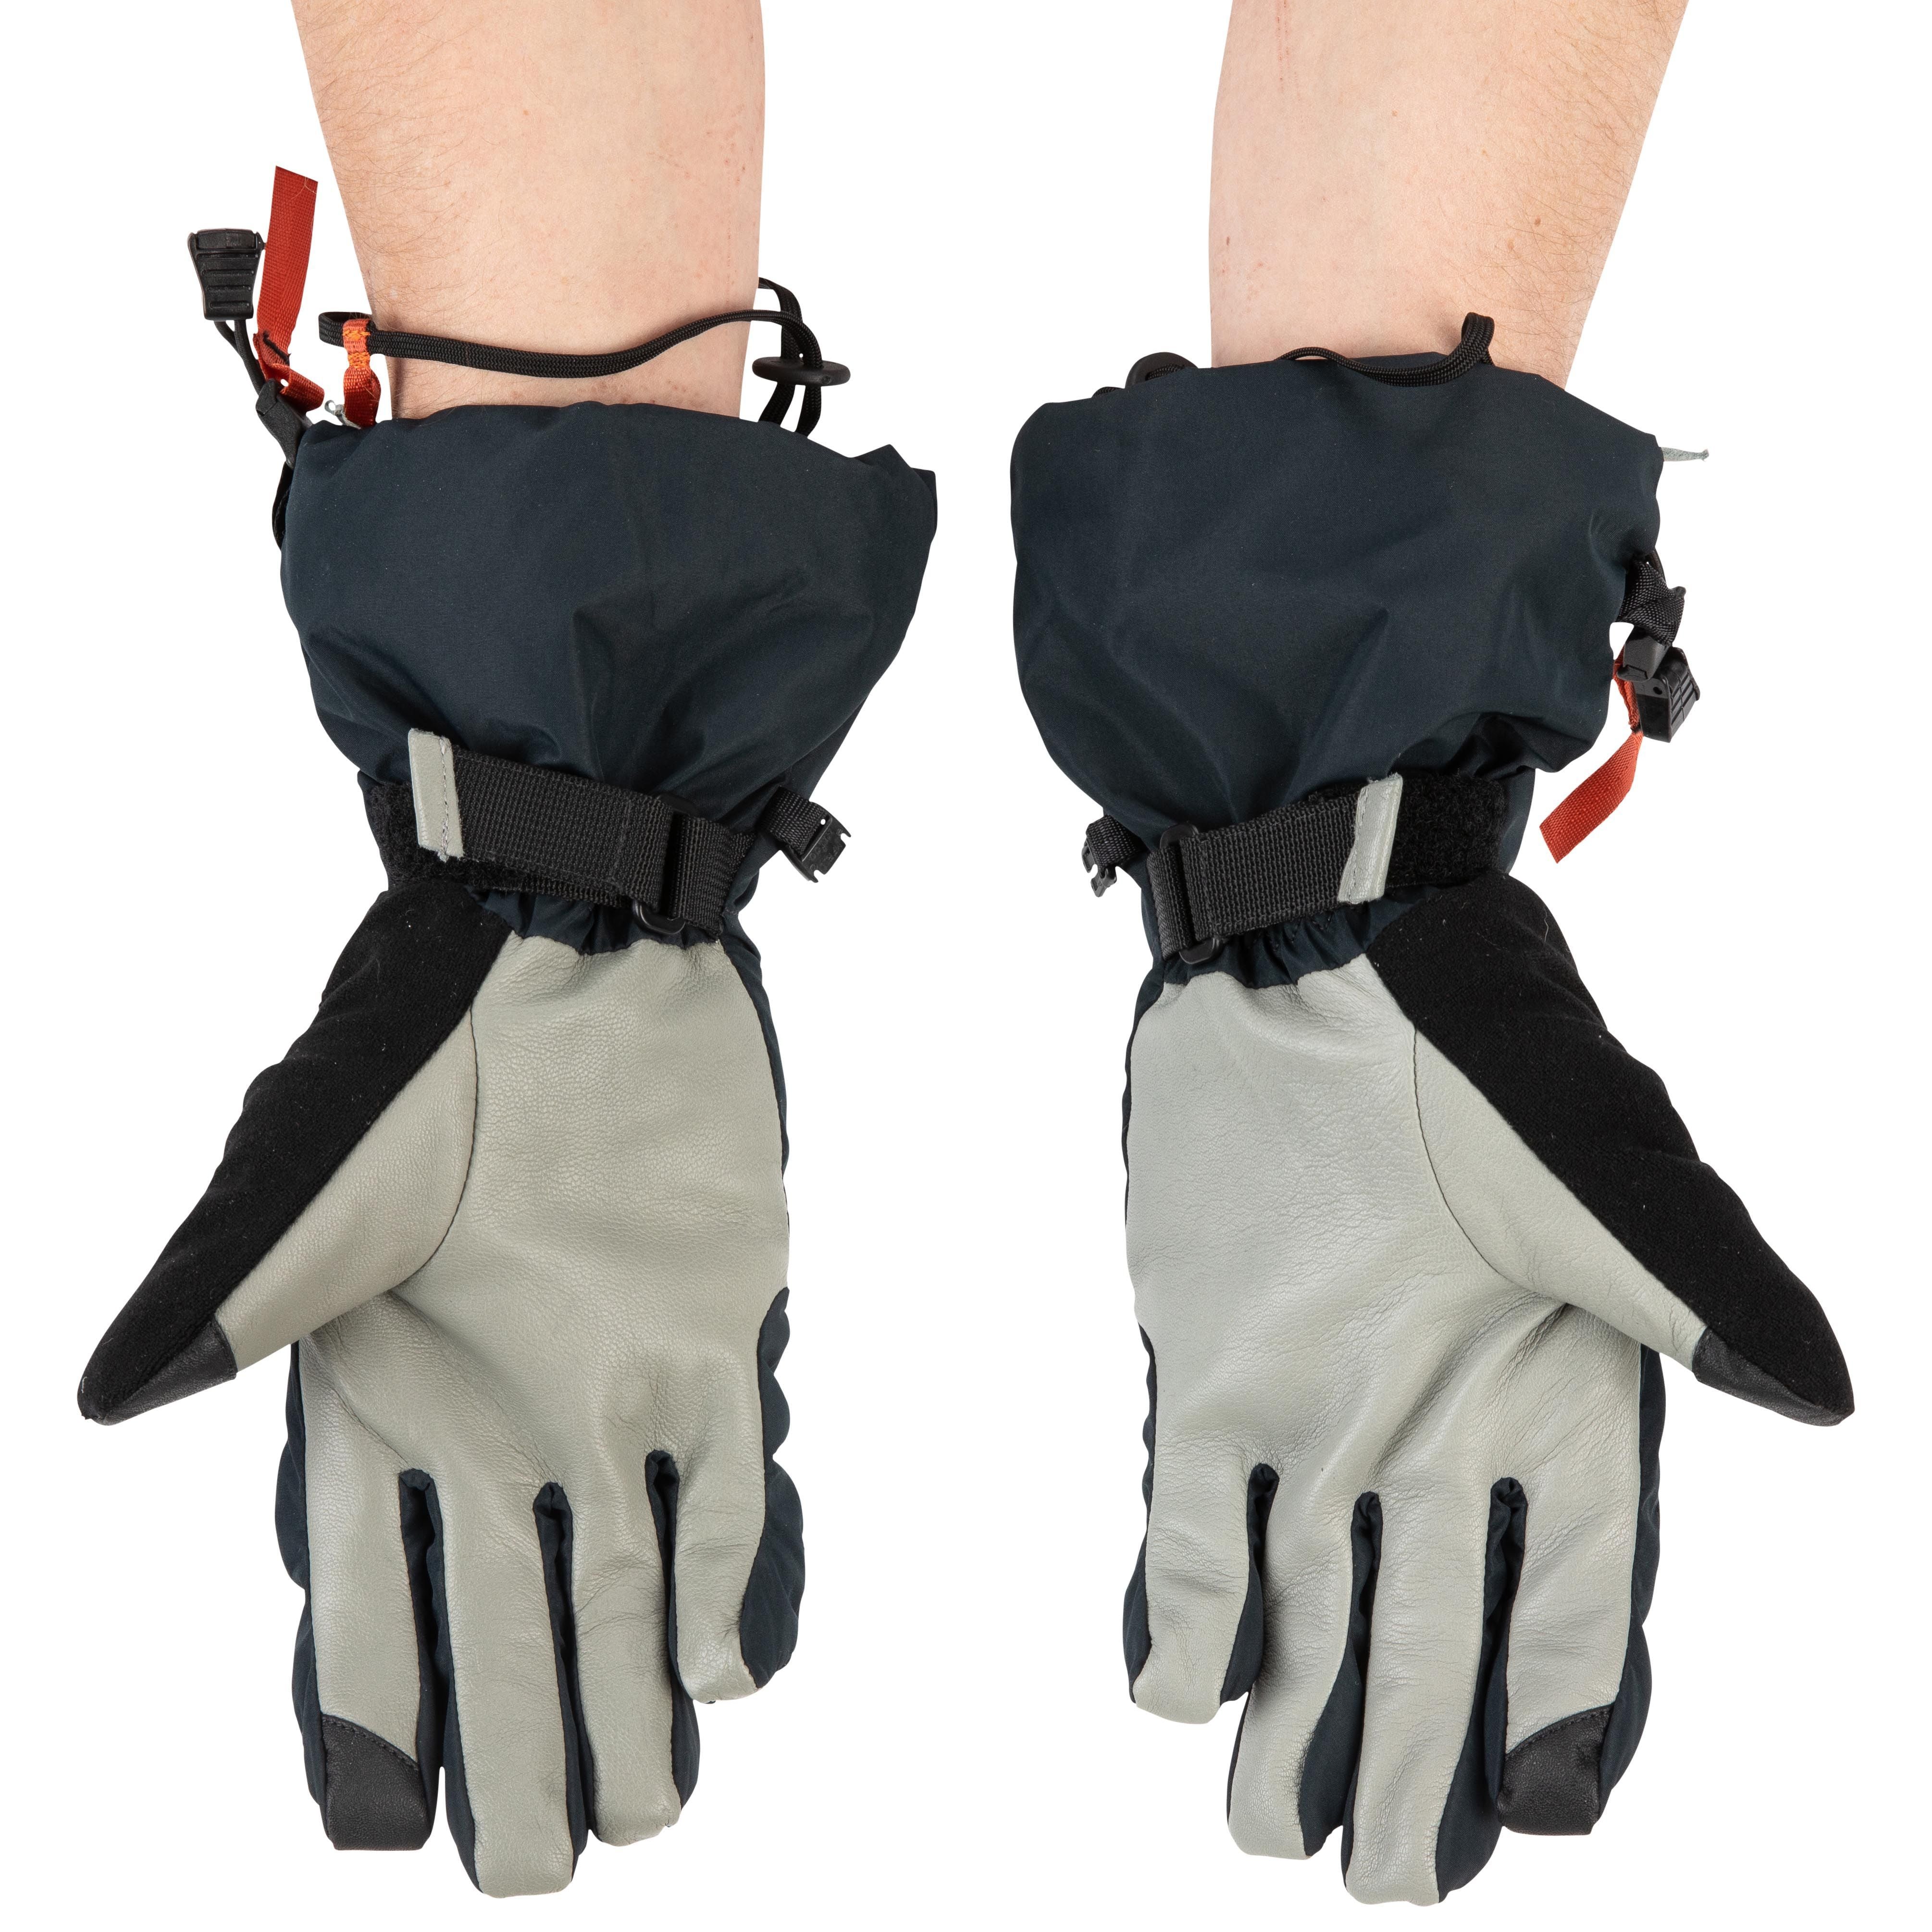 Simms Challenger Insulated Glove Black Image 1